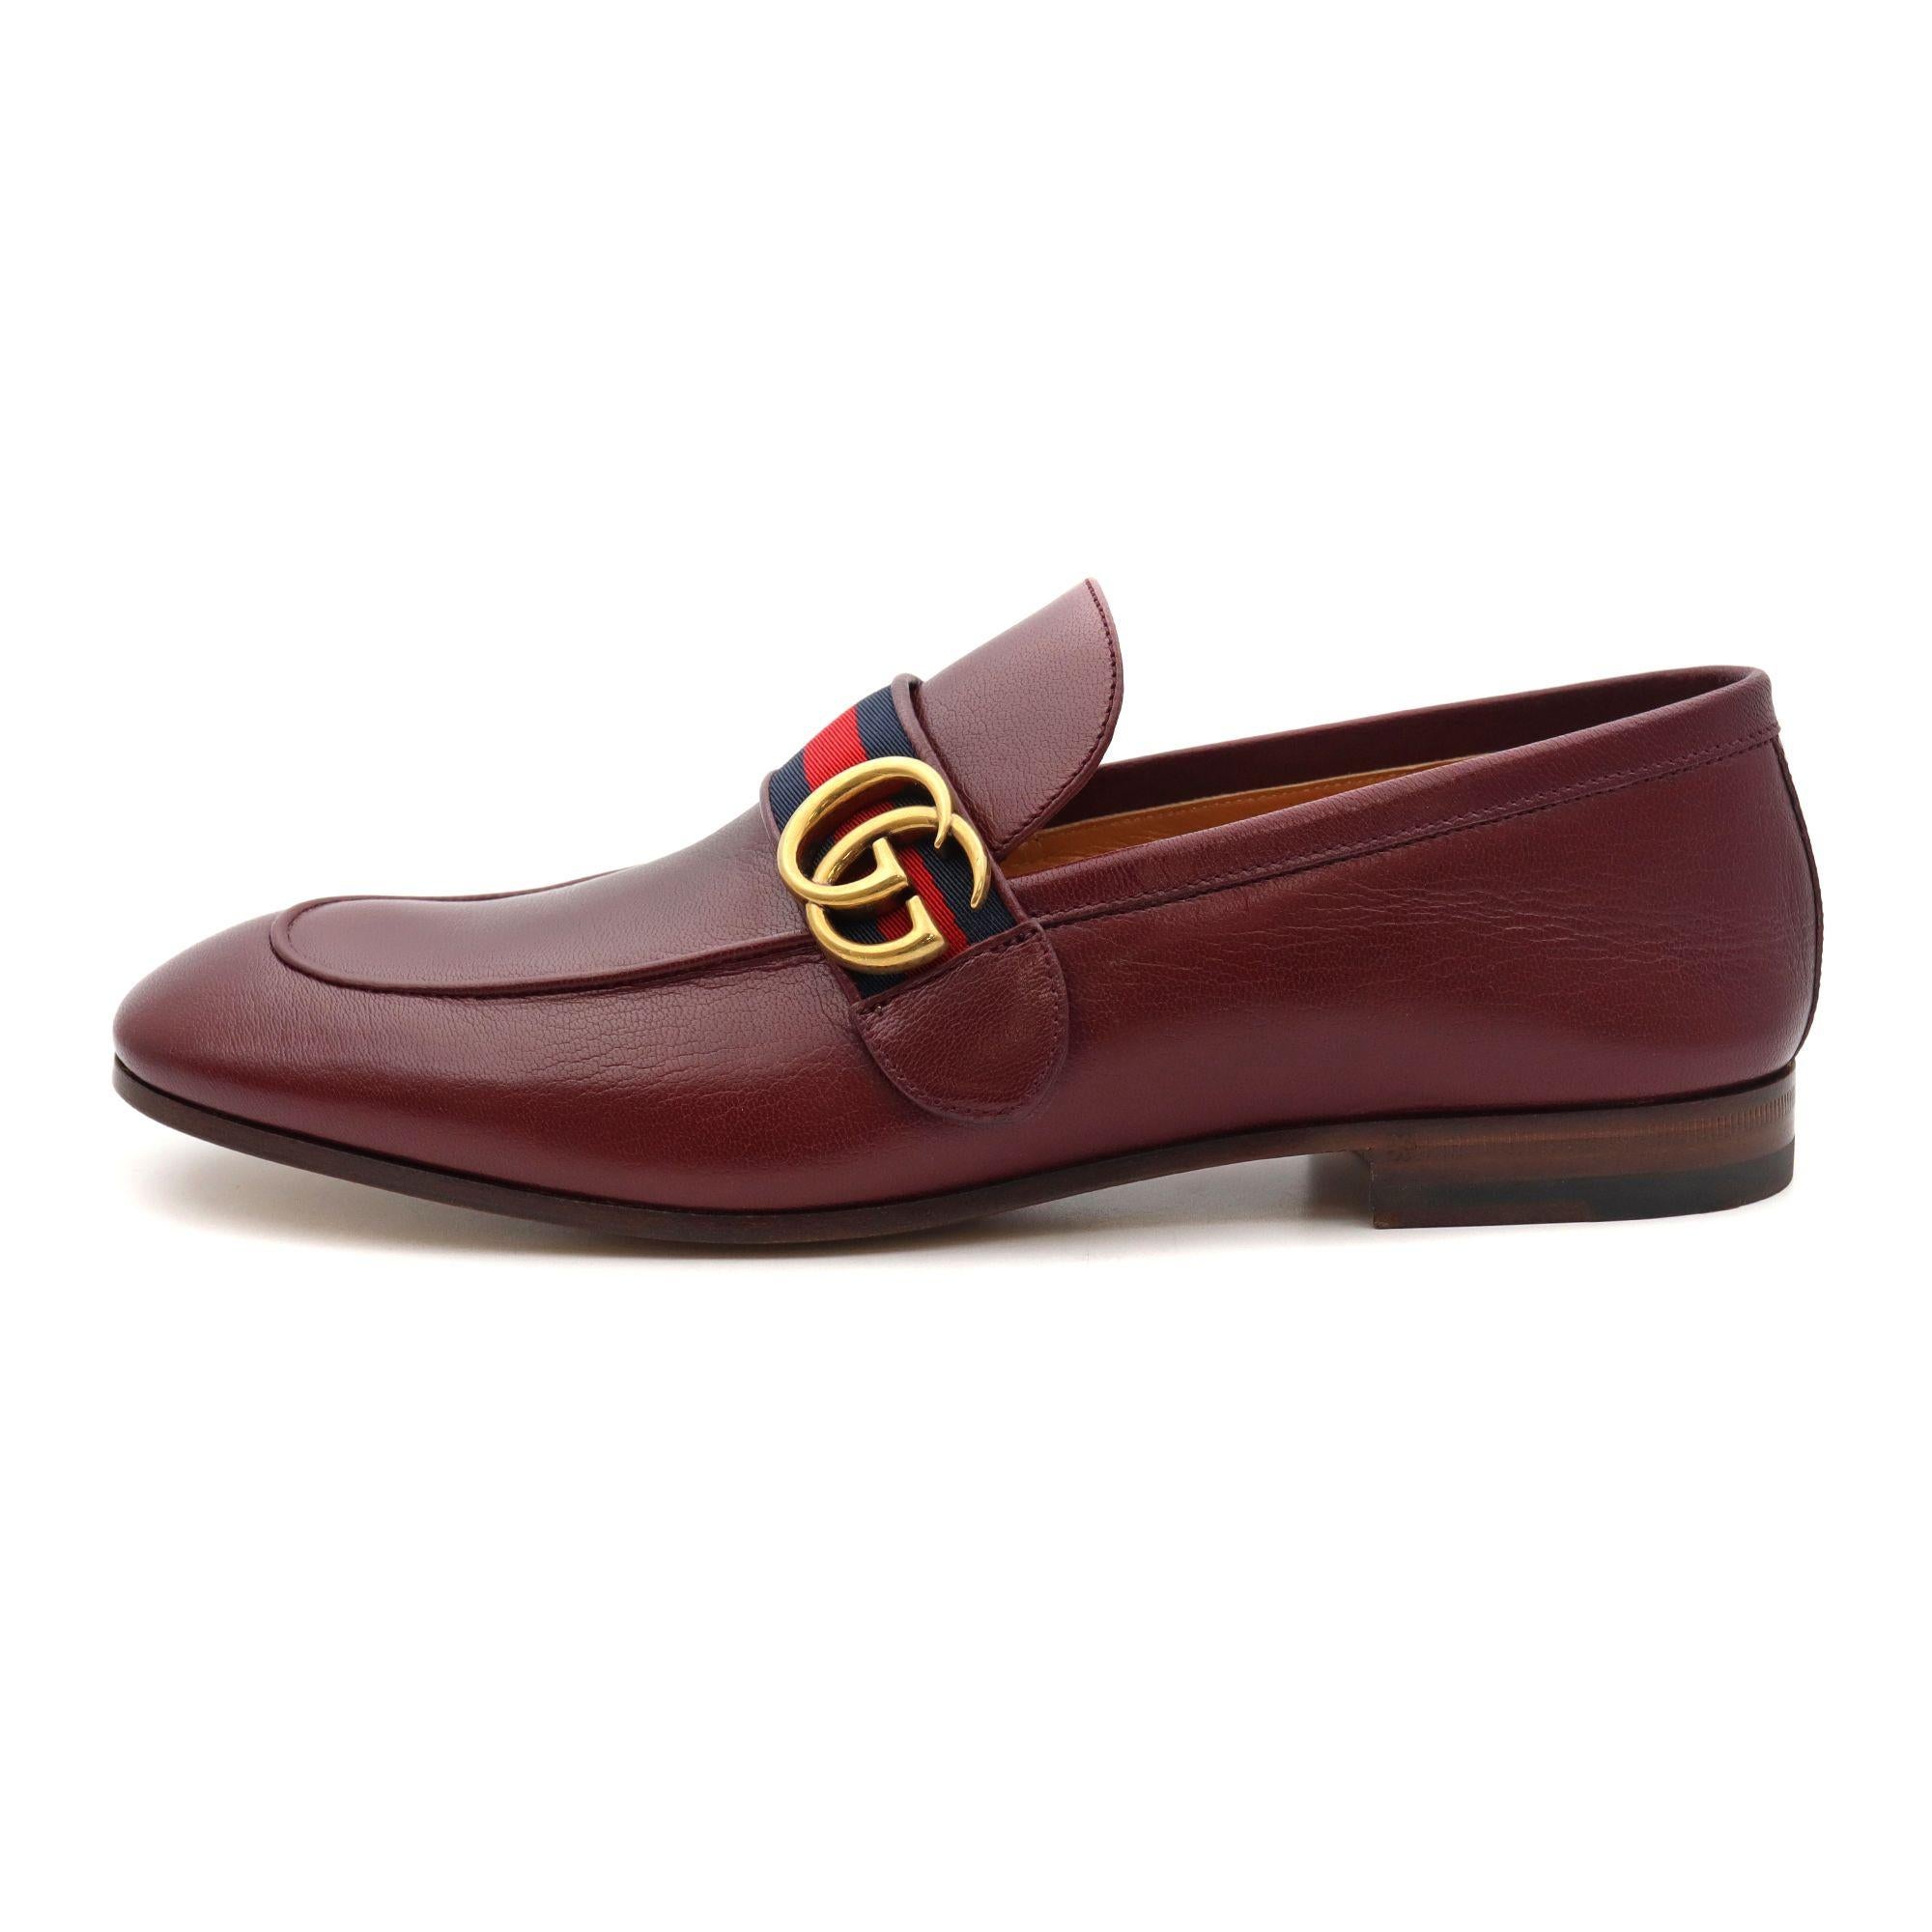 burgundy gucci loafers men's